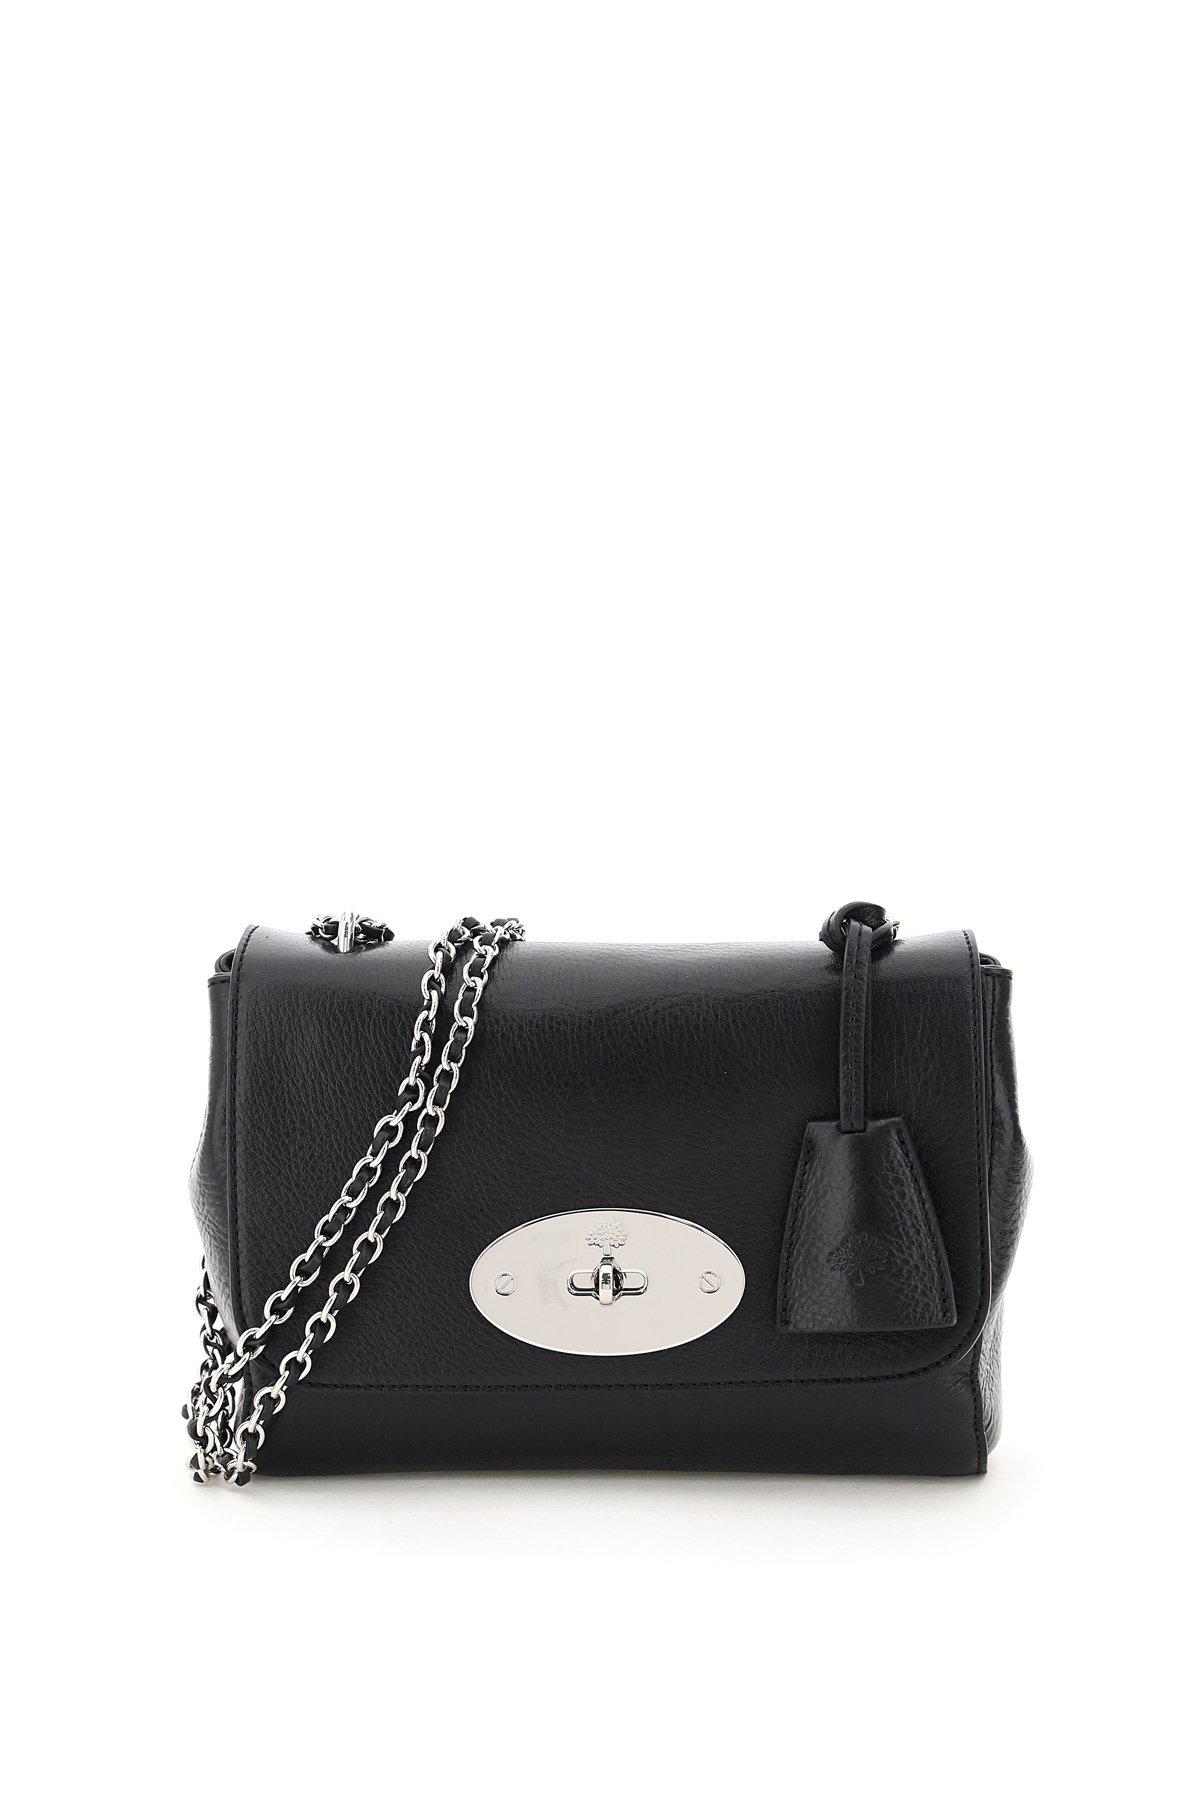 Mulberry Leather Small Lily Bag in Nero (Black) - Save 55% | Lyst